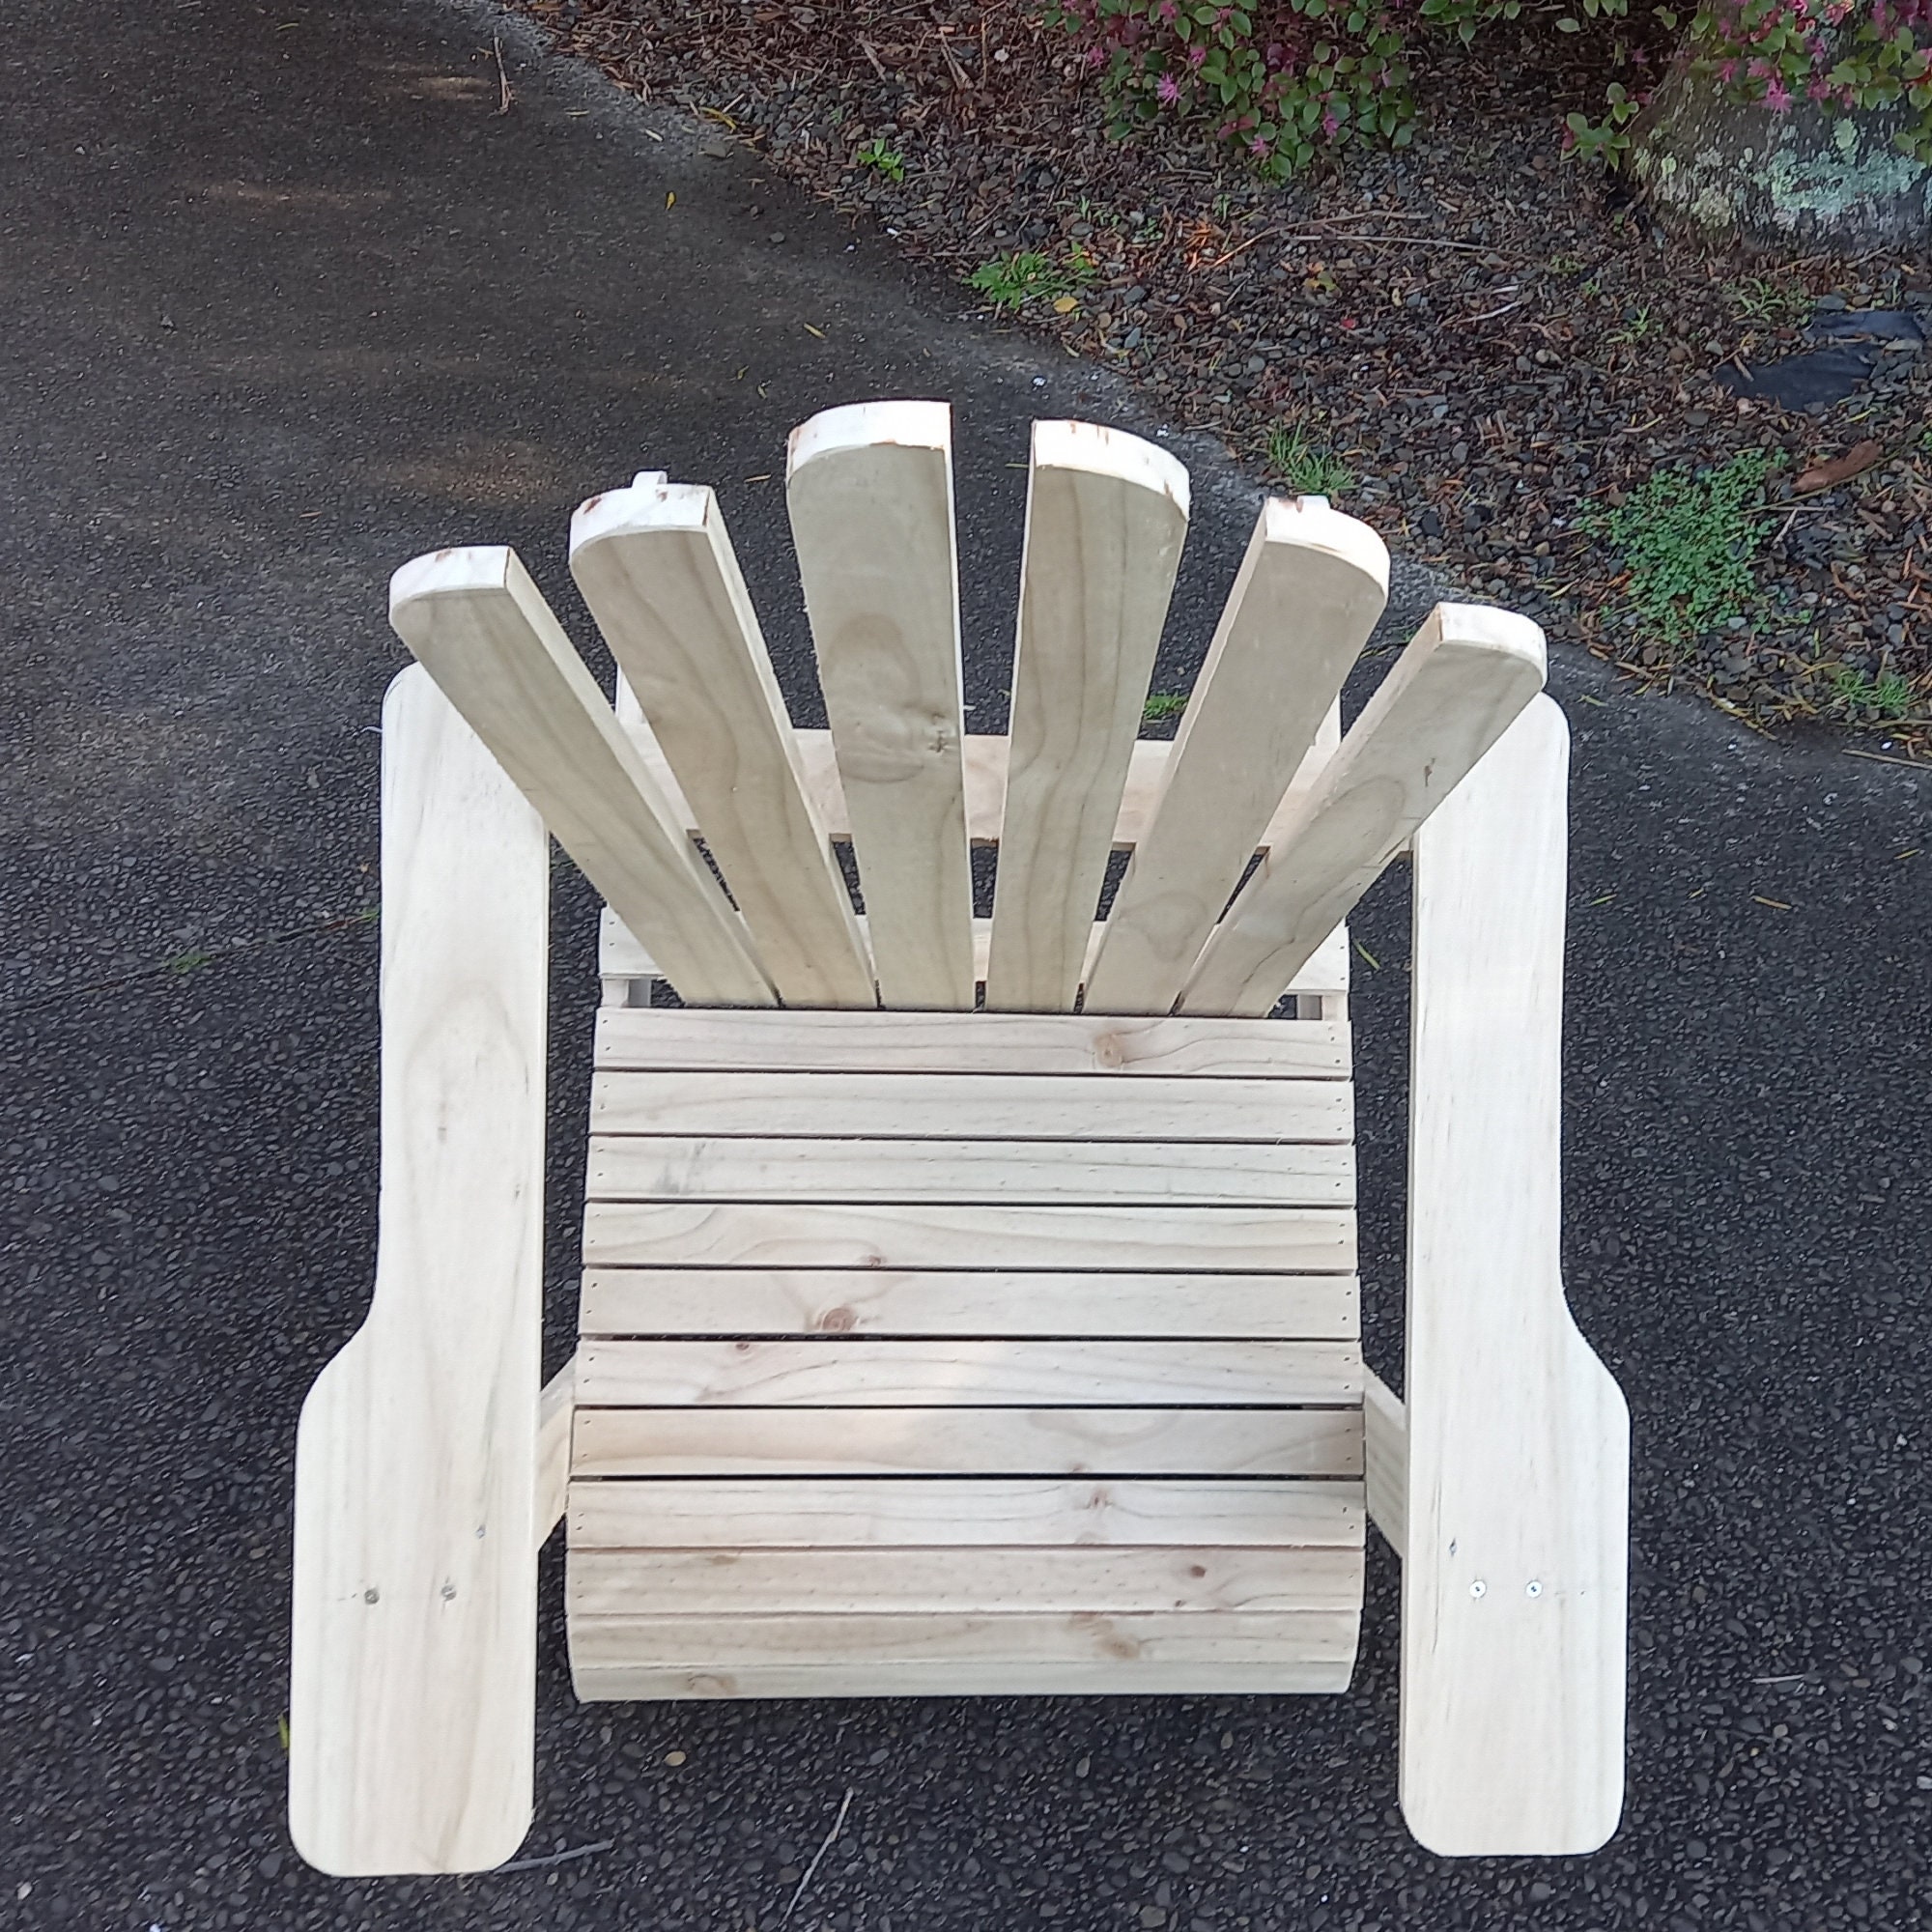 Plans for an Adirondack Chair Etsy